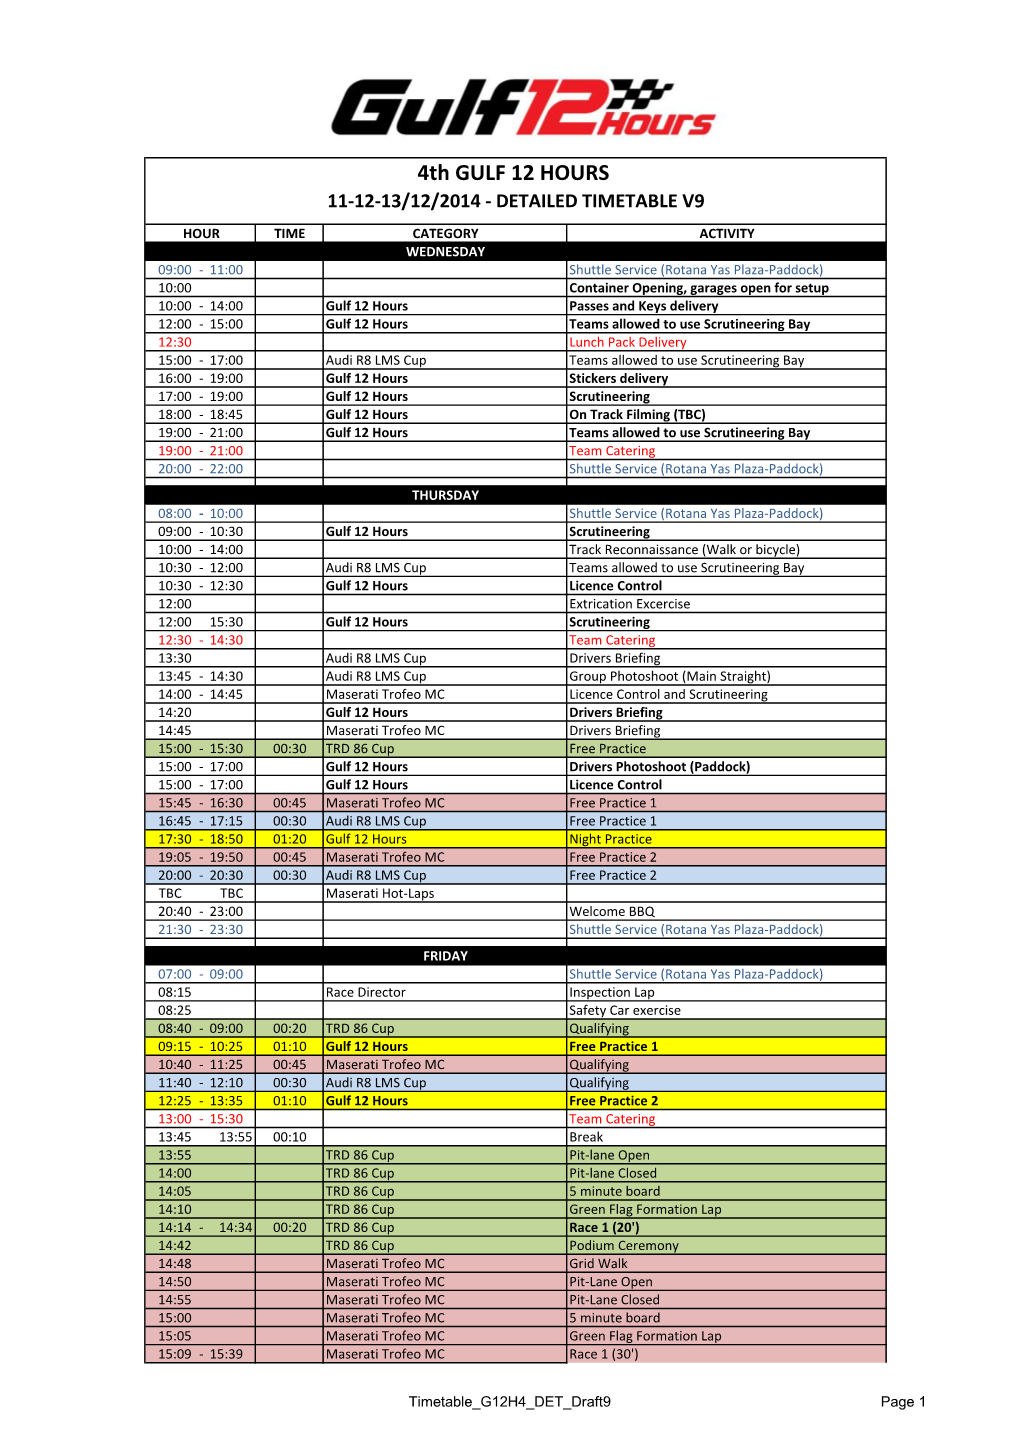 4Th GULF 12 HOURS 11-12-13/12/2014 - DETAILED TIMETABLE V9